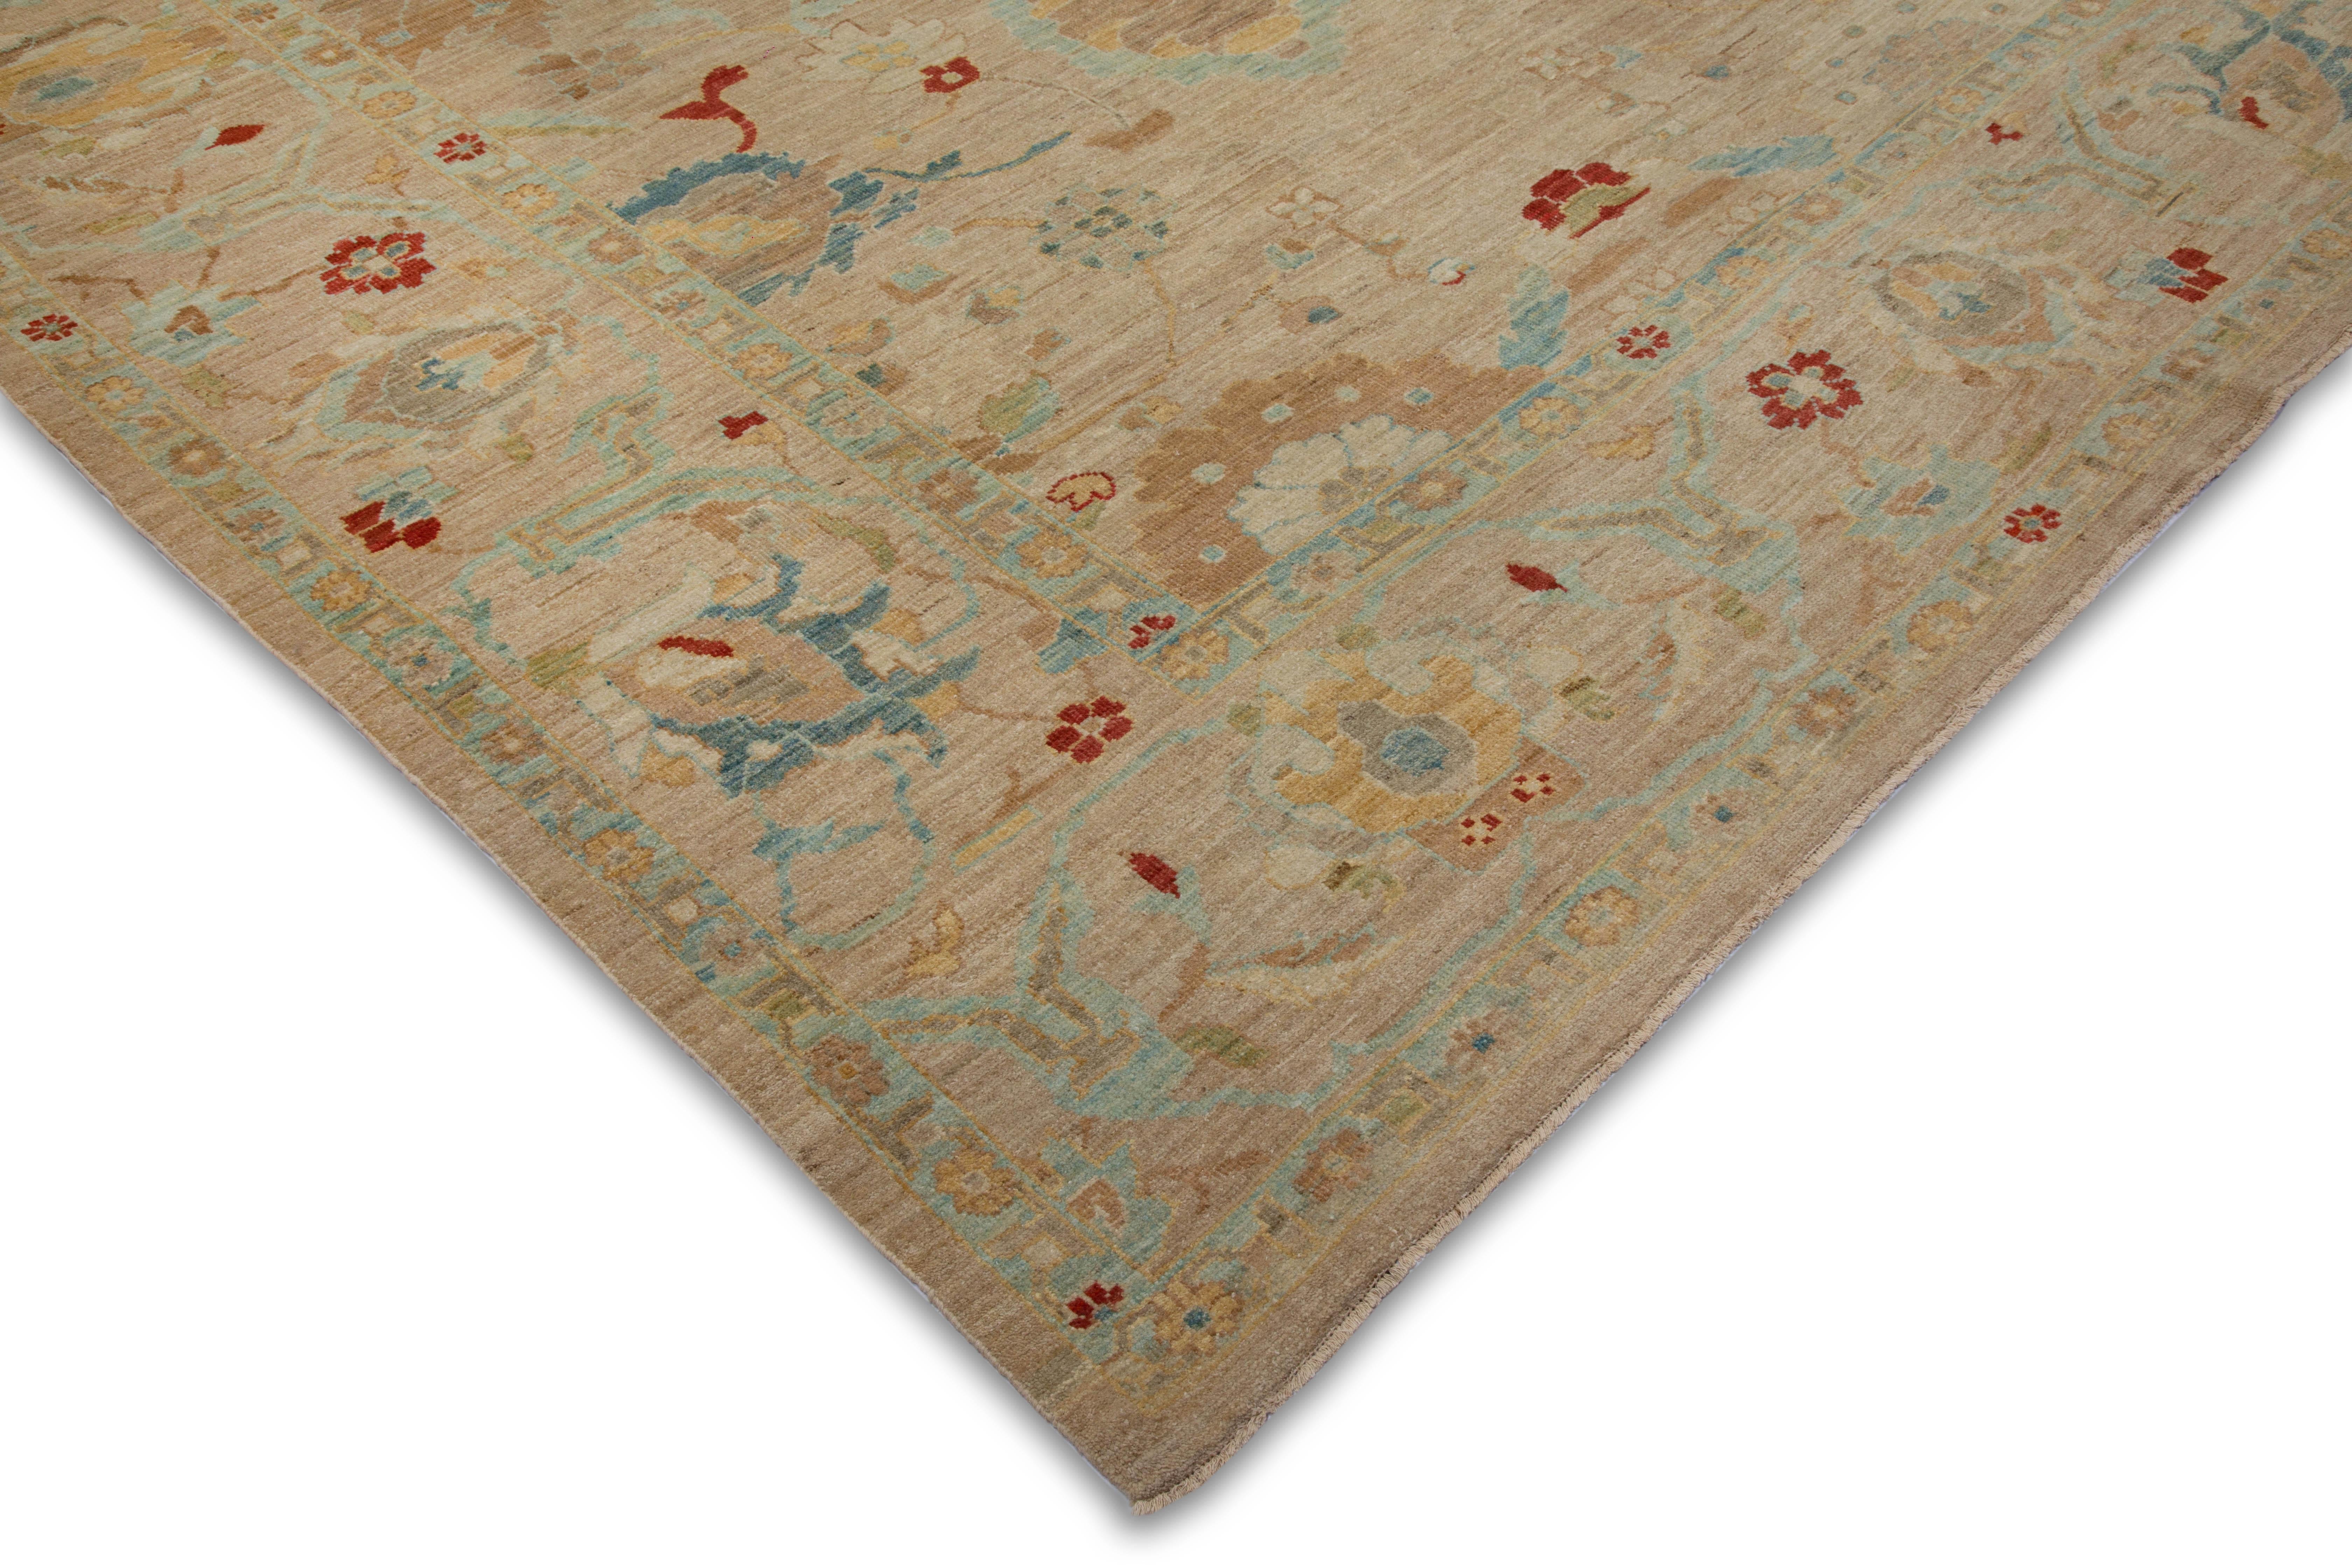 Hand-Woven Oversized Contemporary Turkish Sultanabad Rug with Eclectic Floral Details